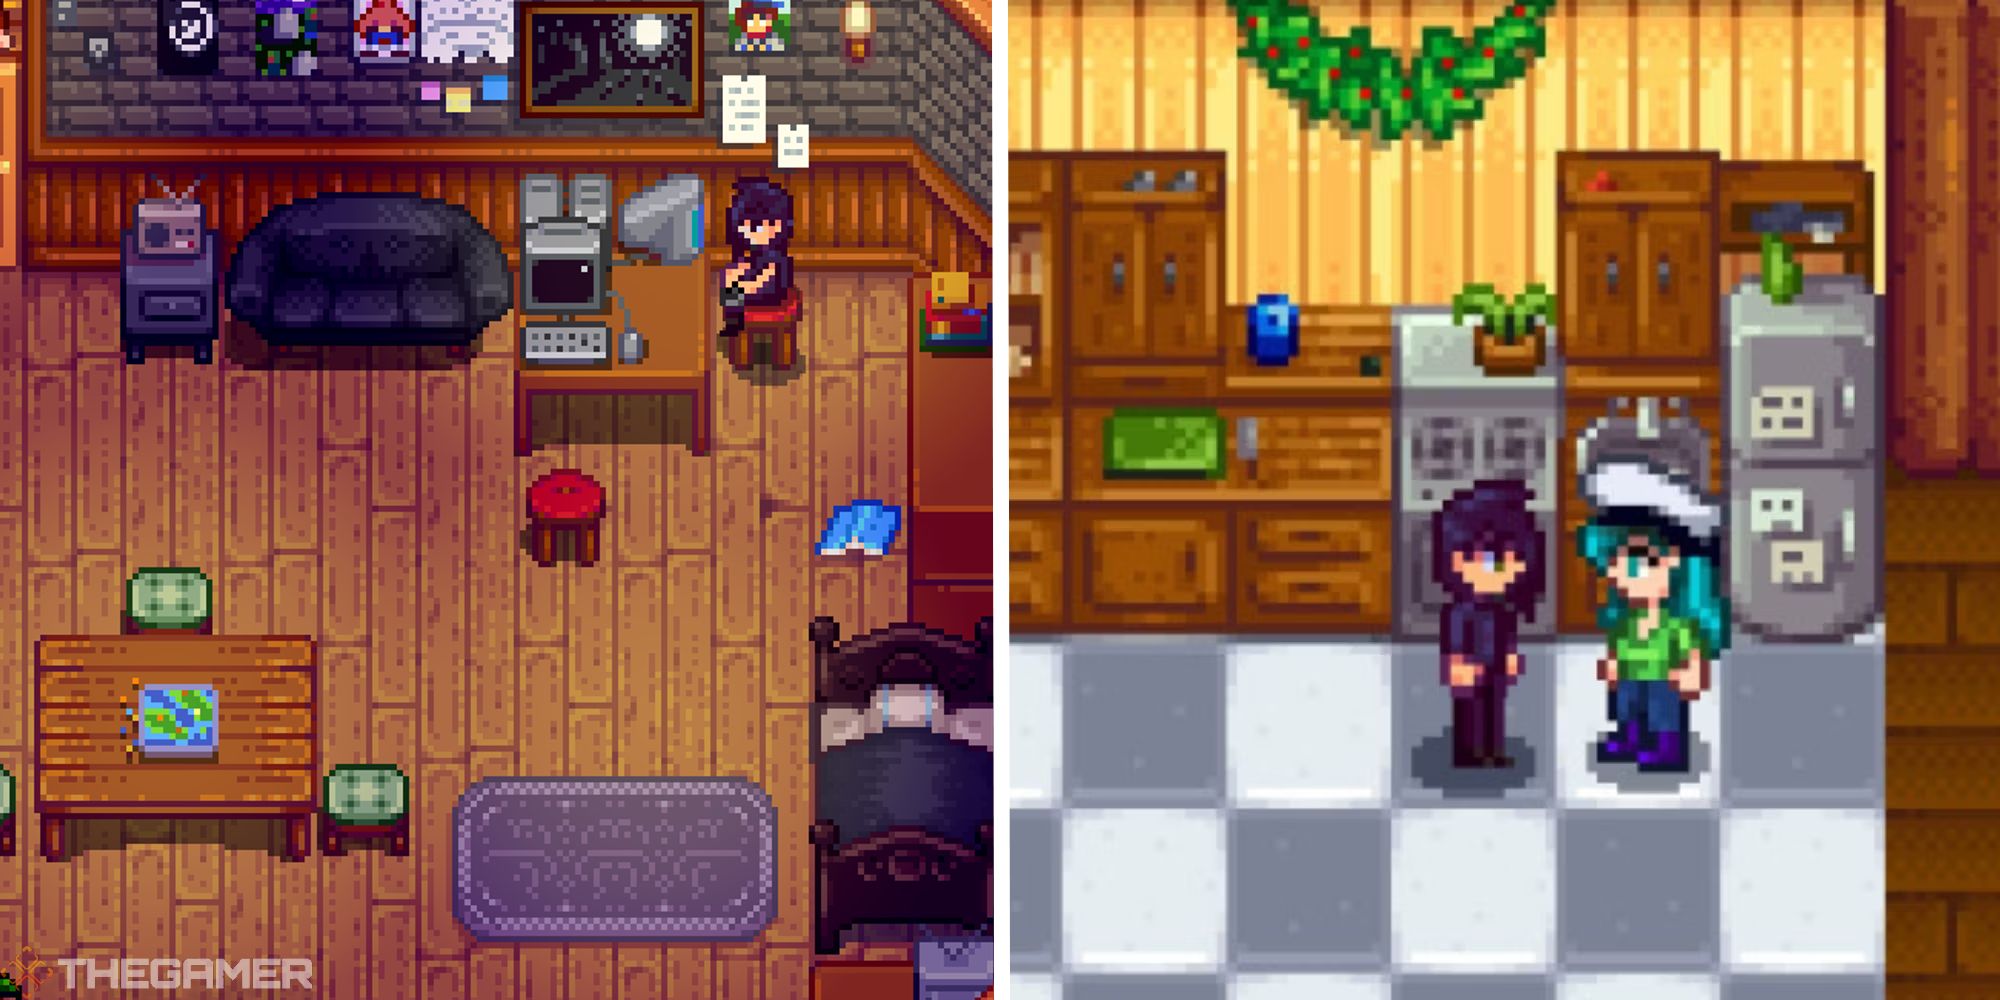 split image showing sebastian in room next to image of sebastian and player in kitchen